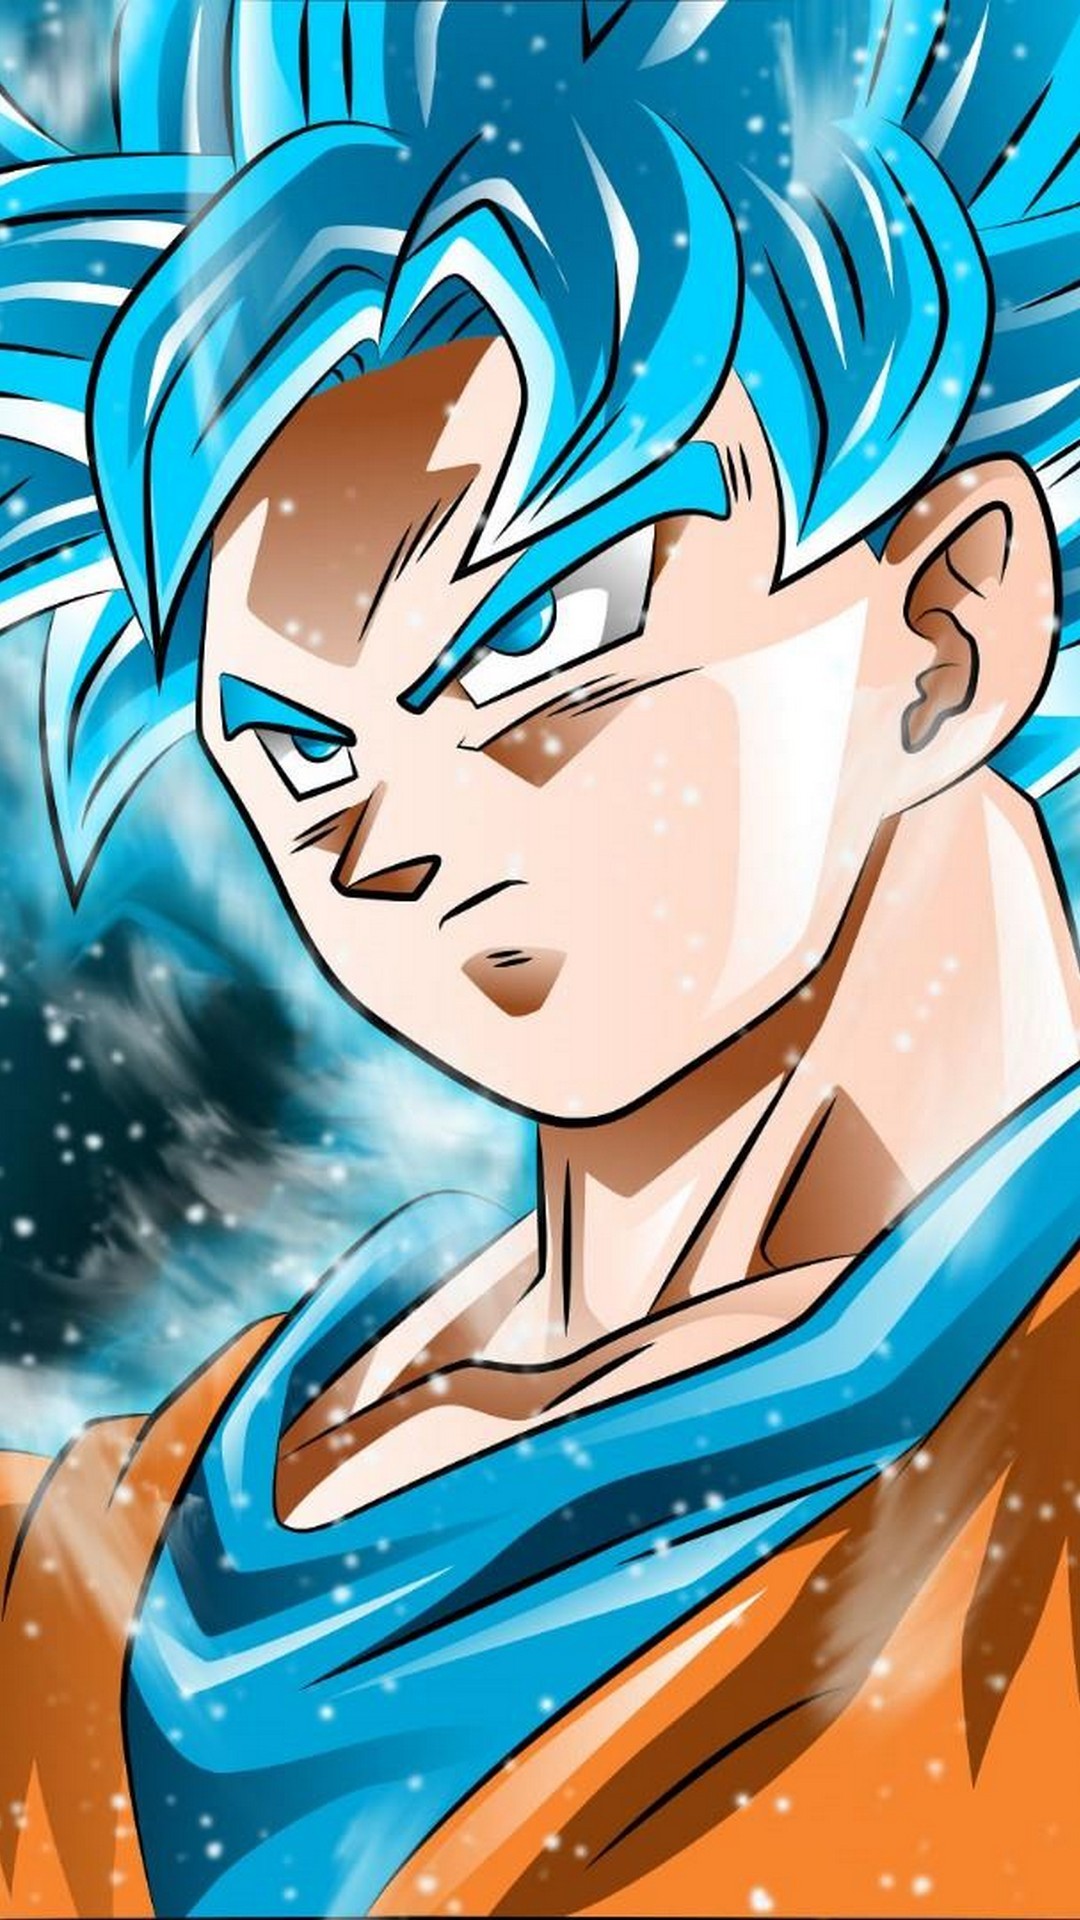 iPhone 8 Wallpaper Goku SSJ Blue with image resolution 1080x1920 pixel. You can make this wallpaper for your iPhone 5, 6, 7, 8, X backgrounds, Mobile Screensaver, or iPad Lock Screen